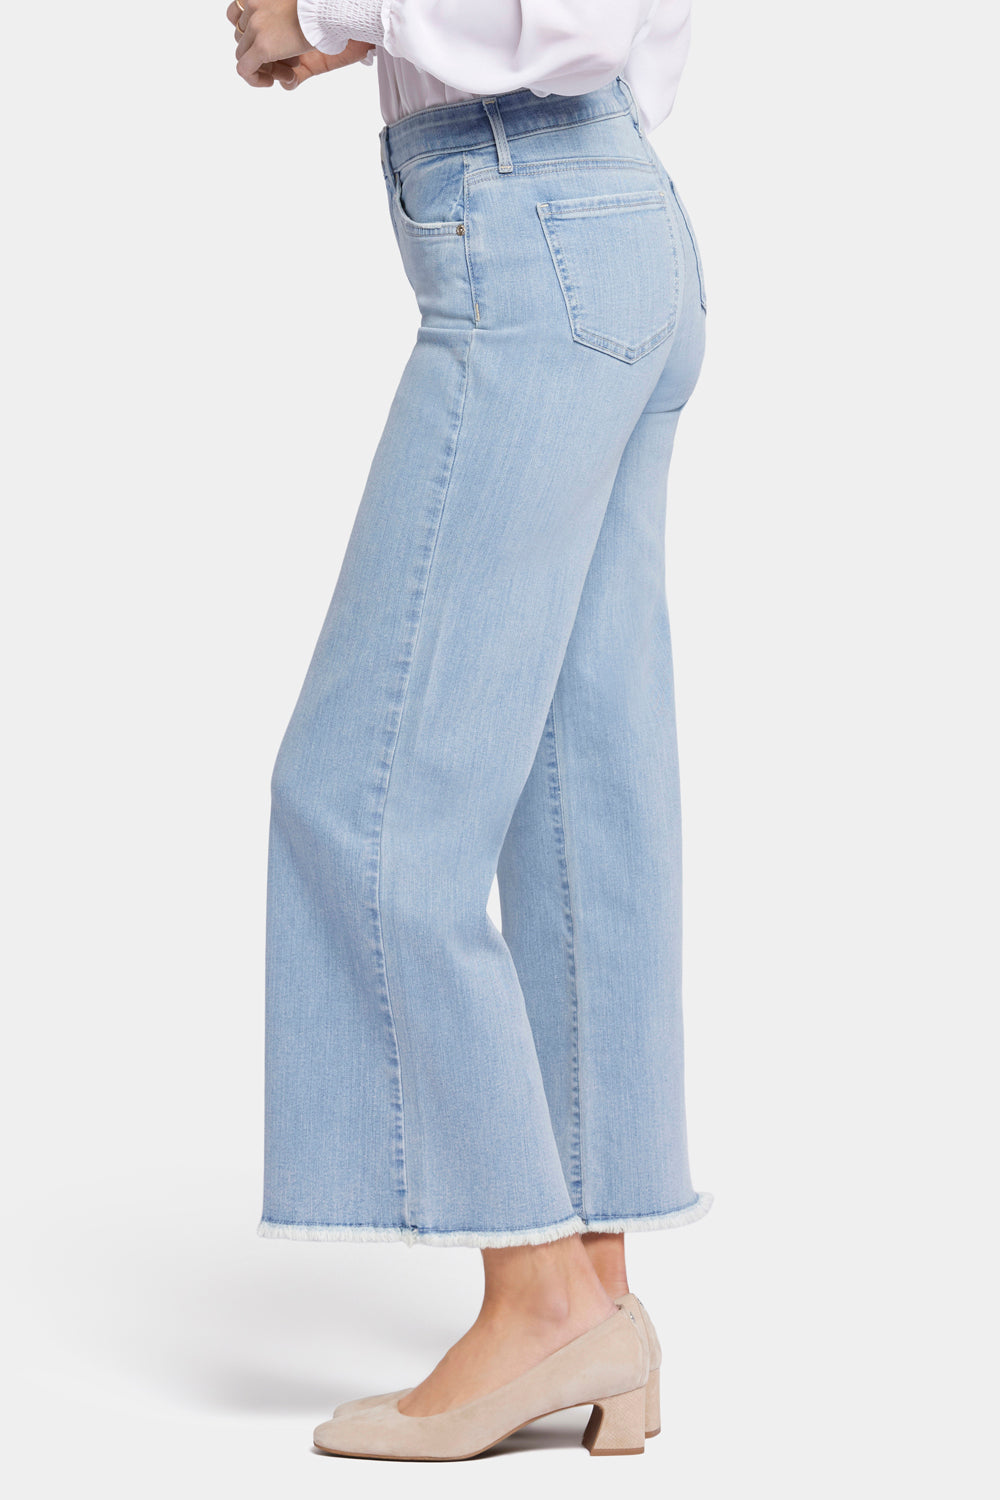 NYDJ Teresa Wide Leg Ankle Jeans With Frayed Hems - Westminster